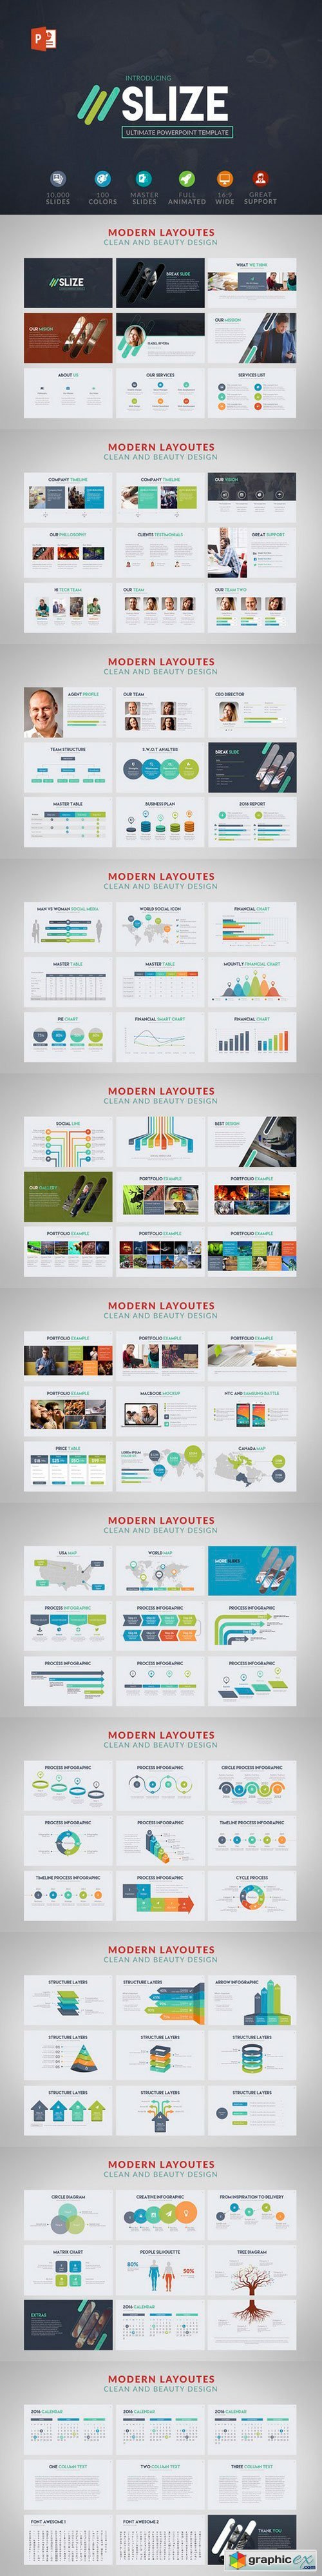 Slize | Powerpoint template